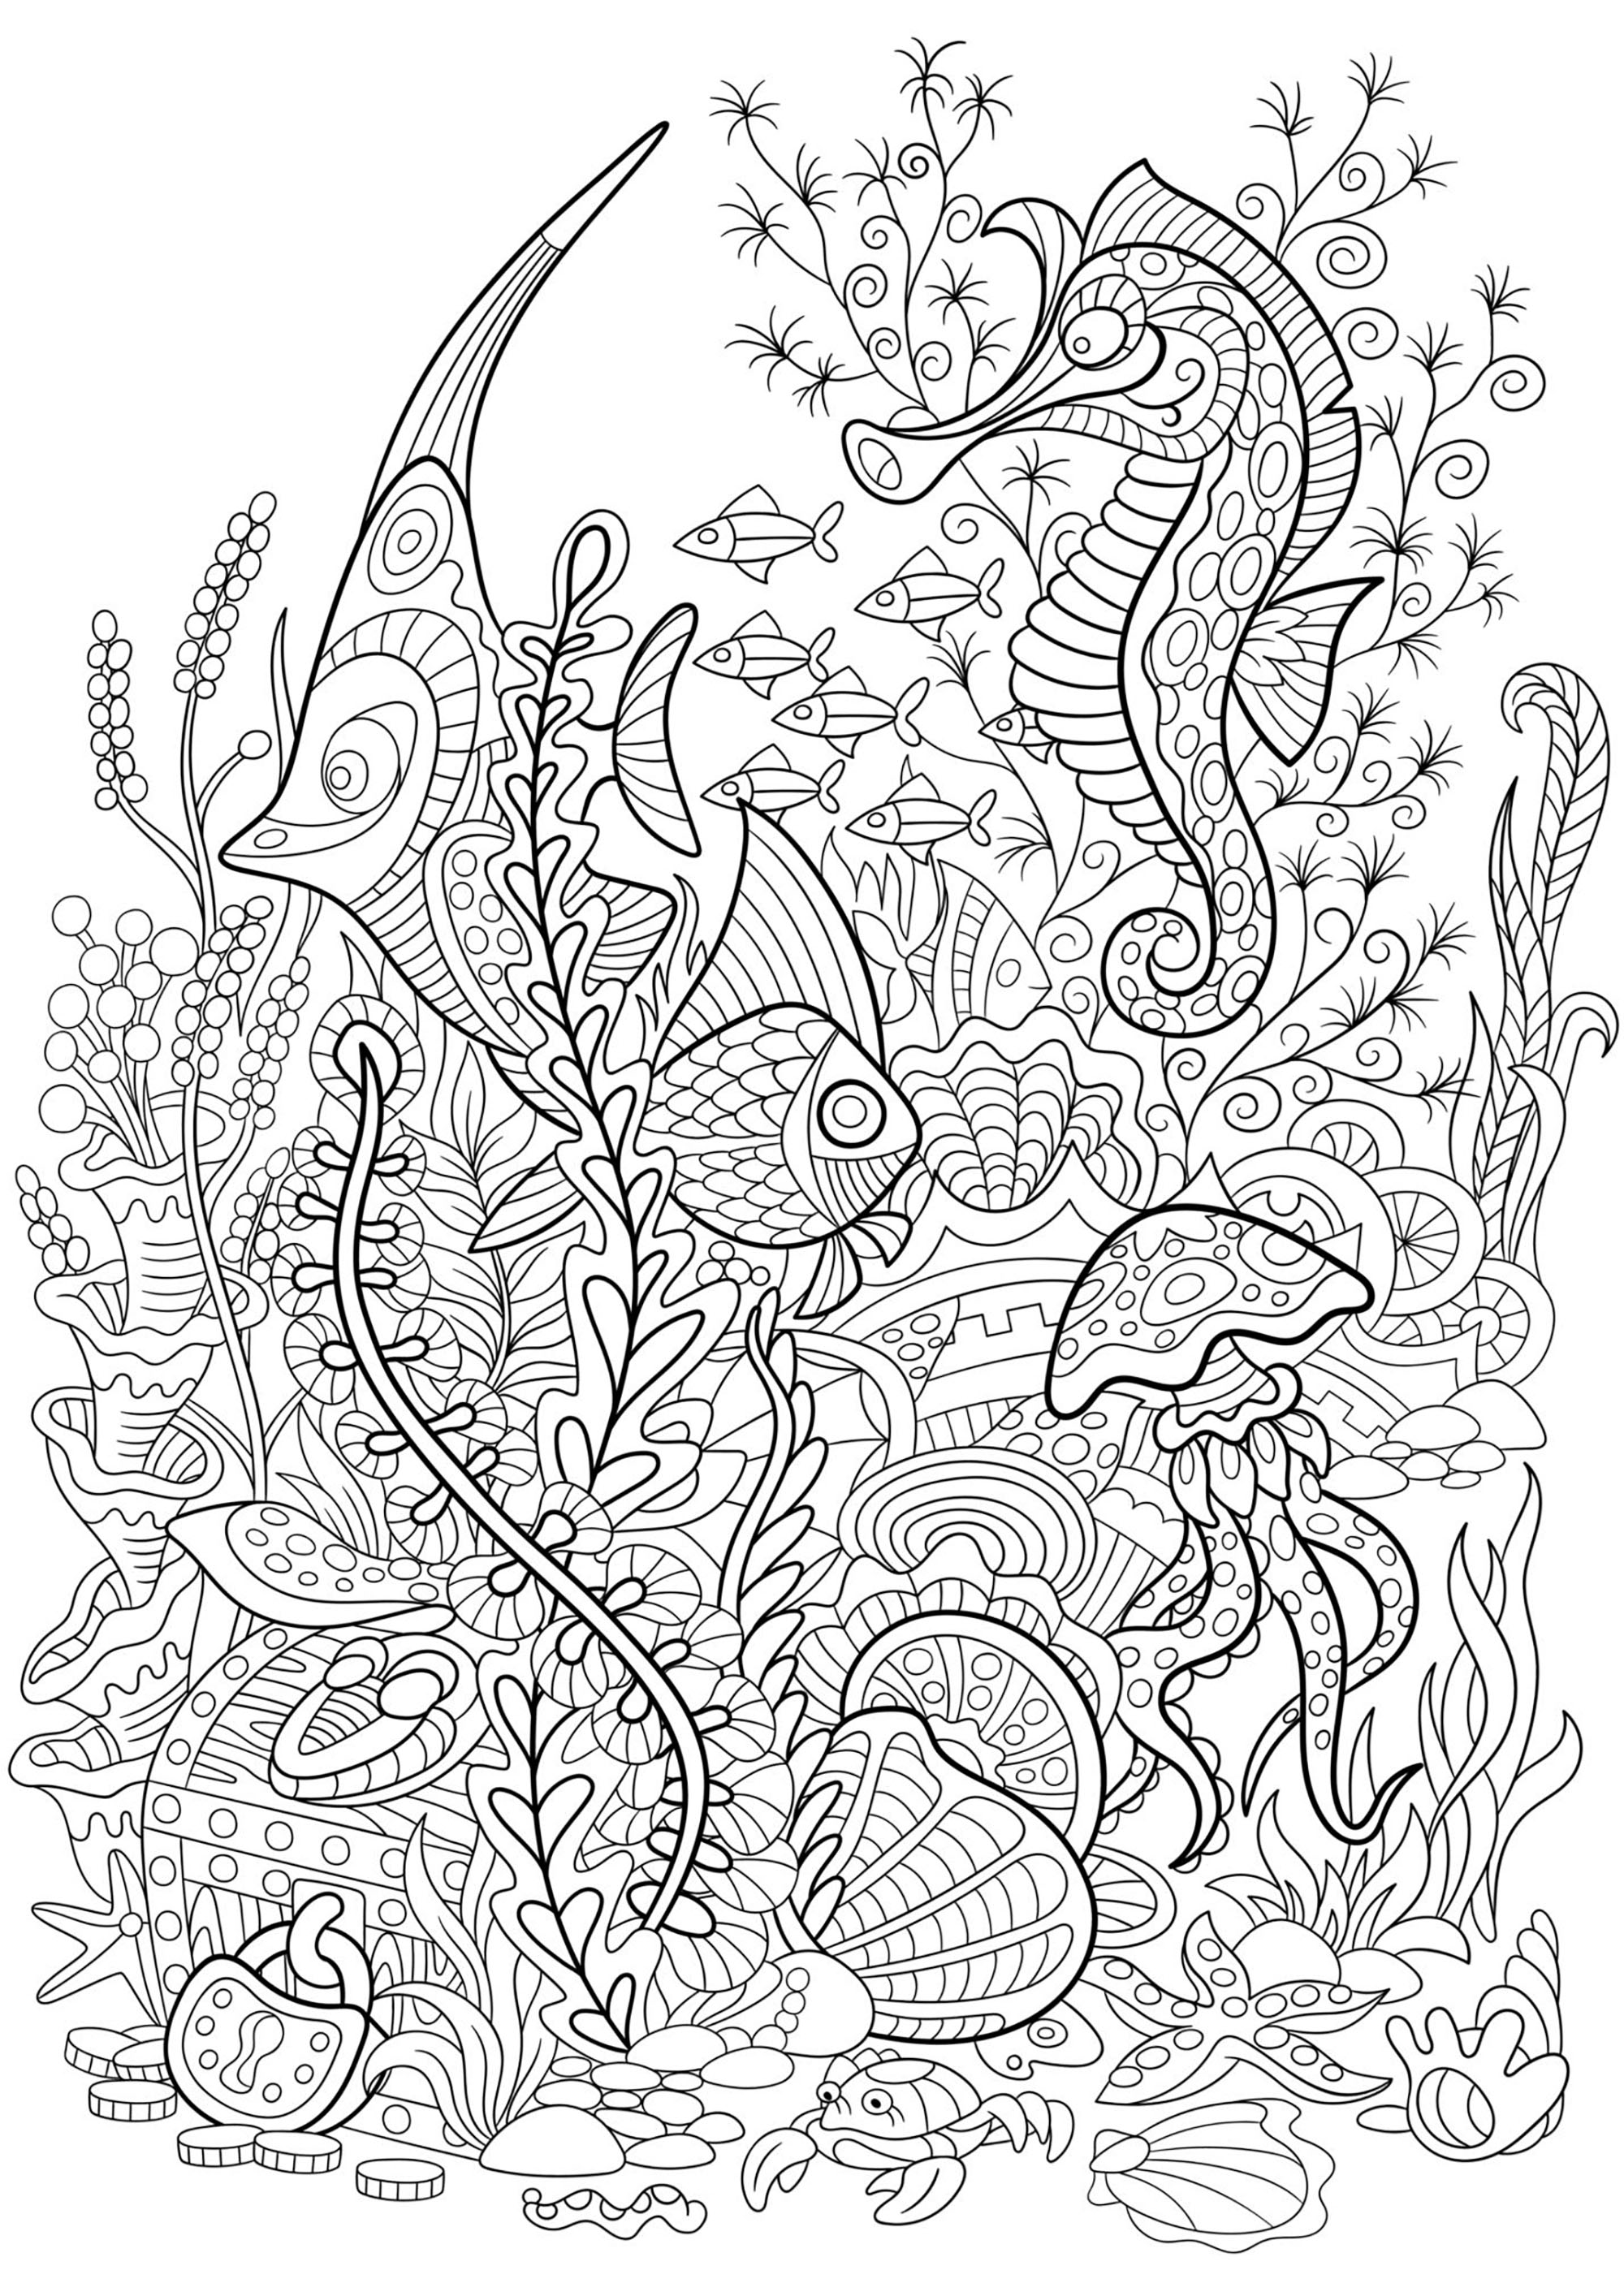 Seaworld Water worlds Adult Coloring Pages